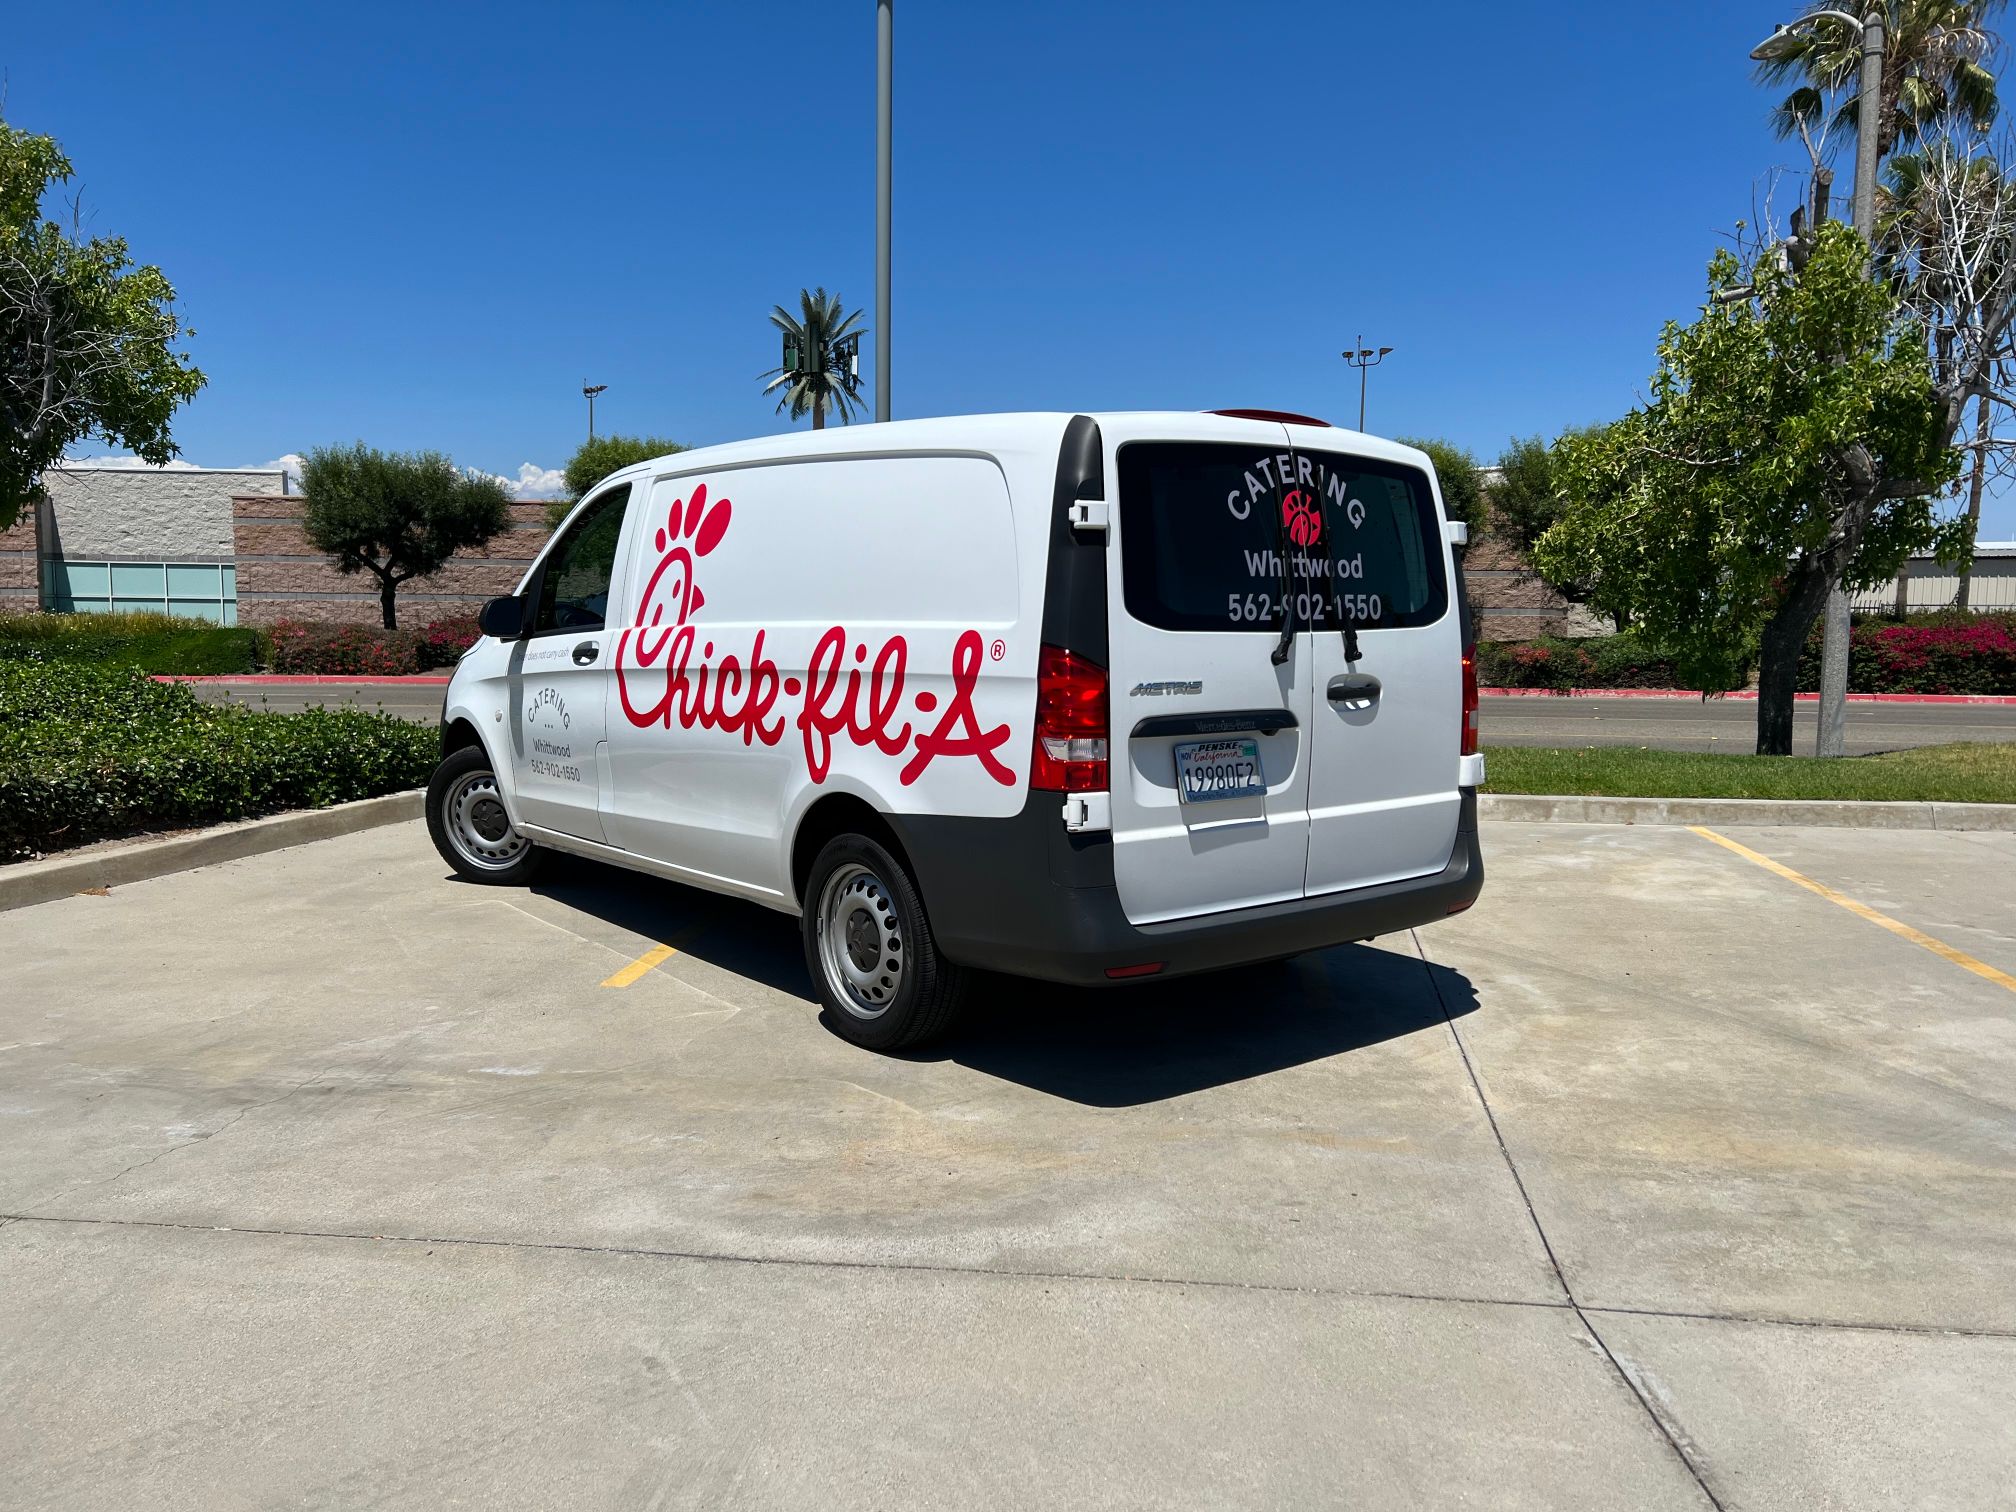 Long Lasting 3M Vinyl Graphics for Chick-fil-A Vans in Orange County CA